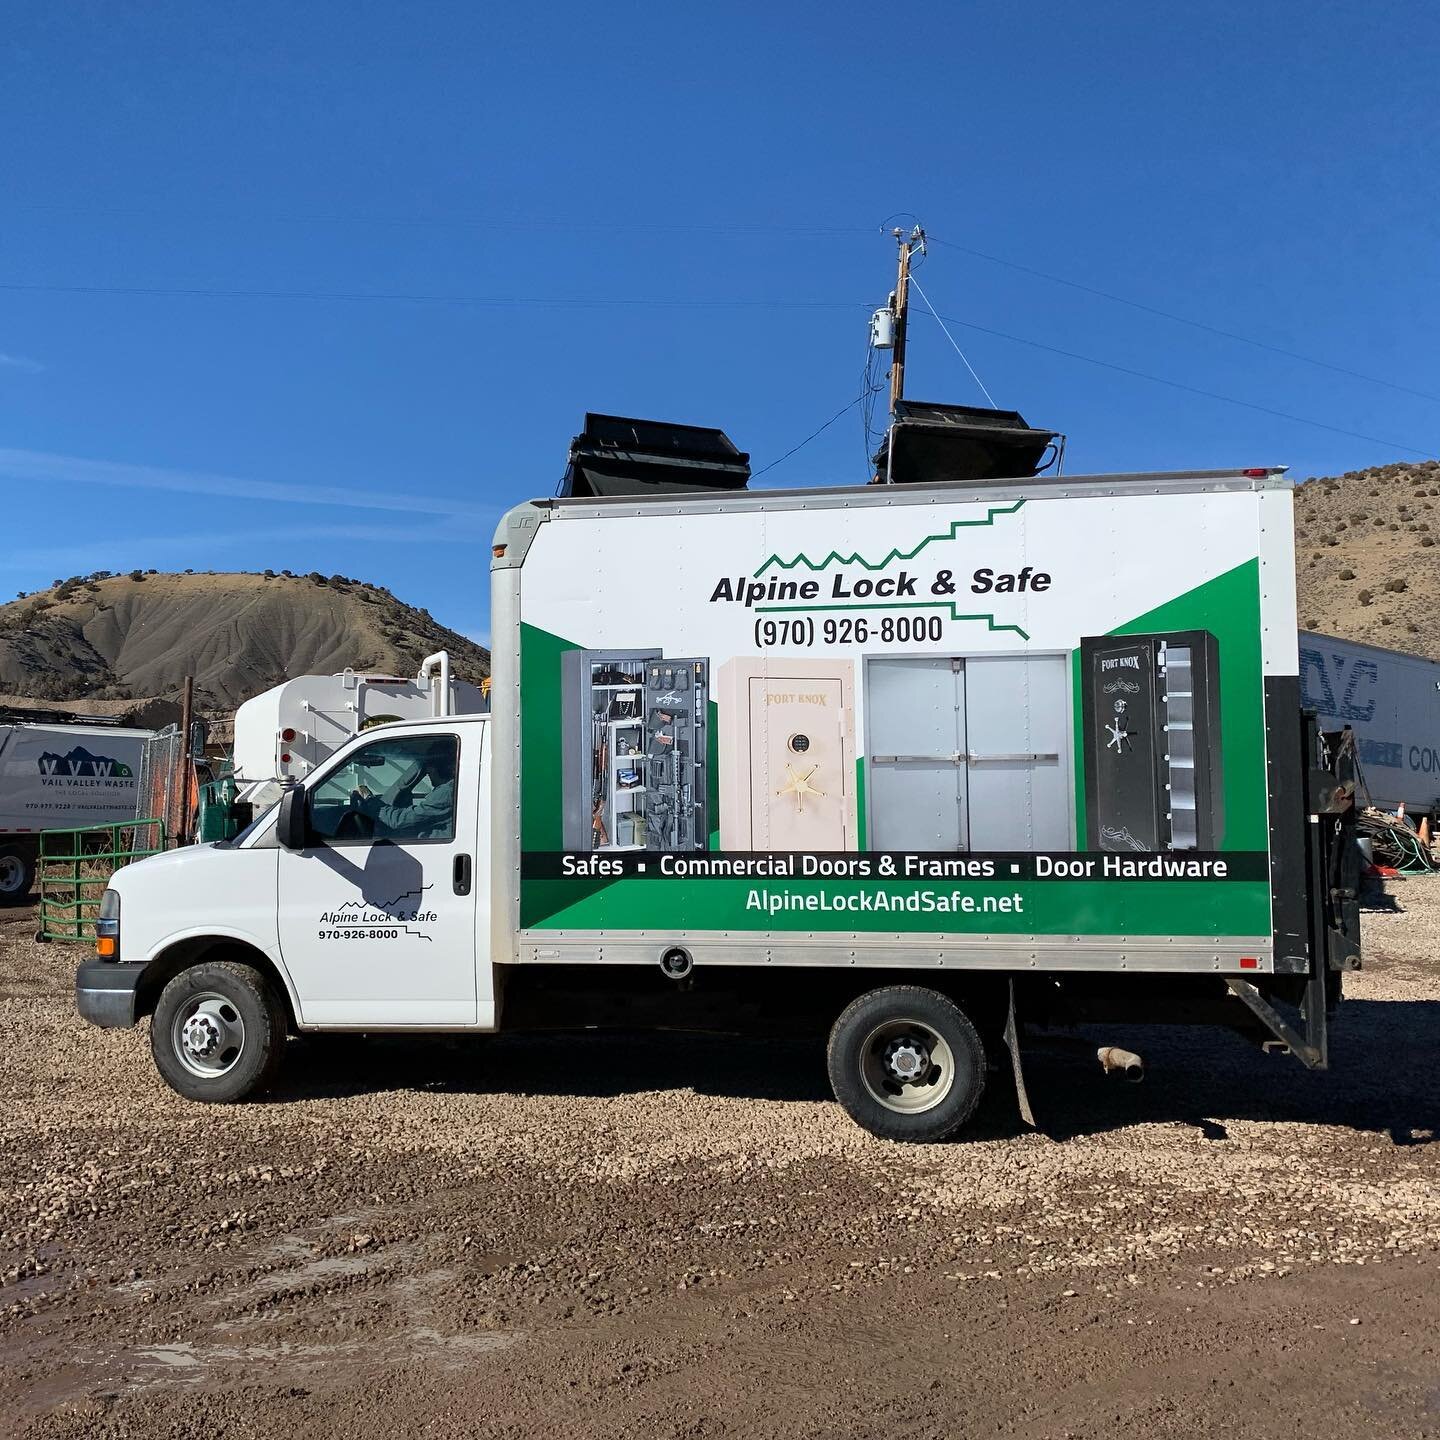 New box truck wrap for Alpine Lock and Safe! Put your message on the road with full or partial vehicle wraps from First Chair Designs.
.
@alpine_locknsafe